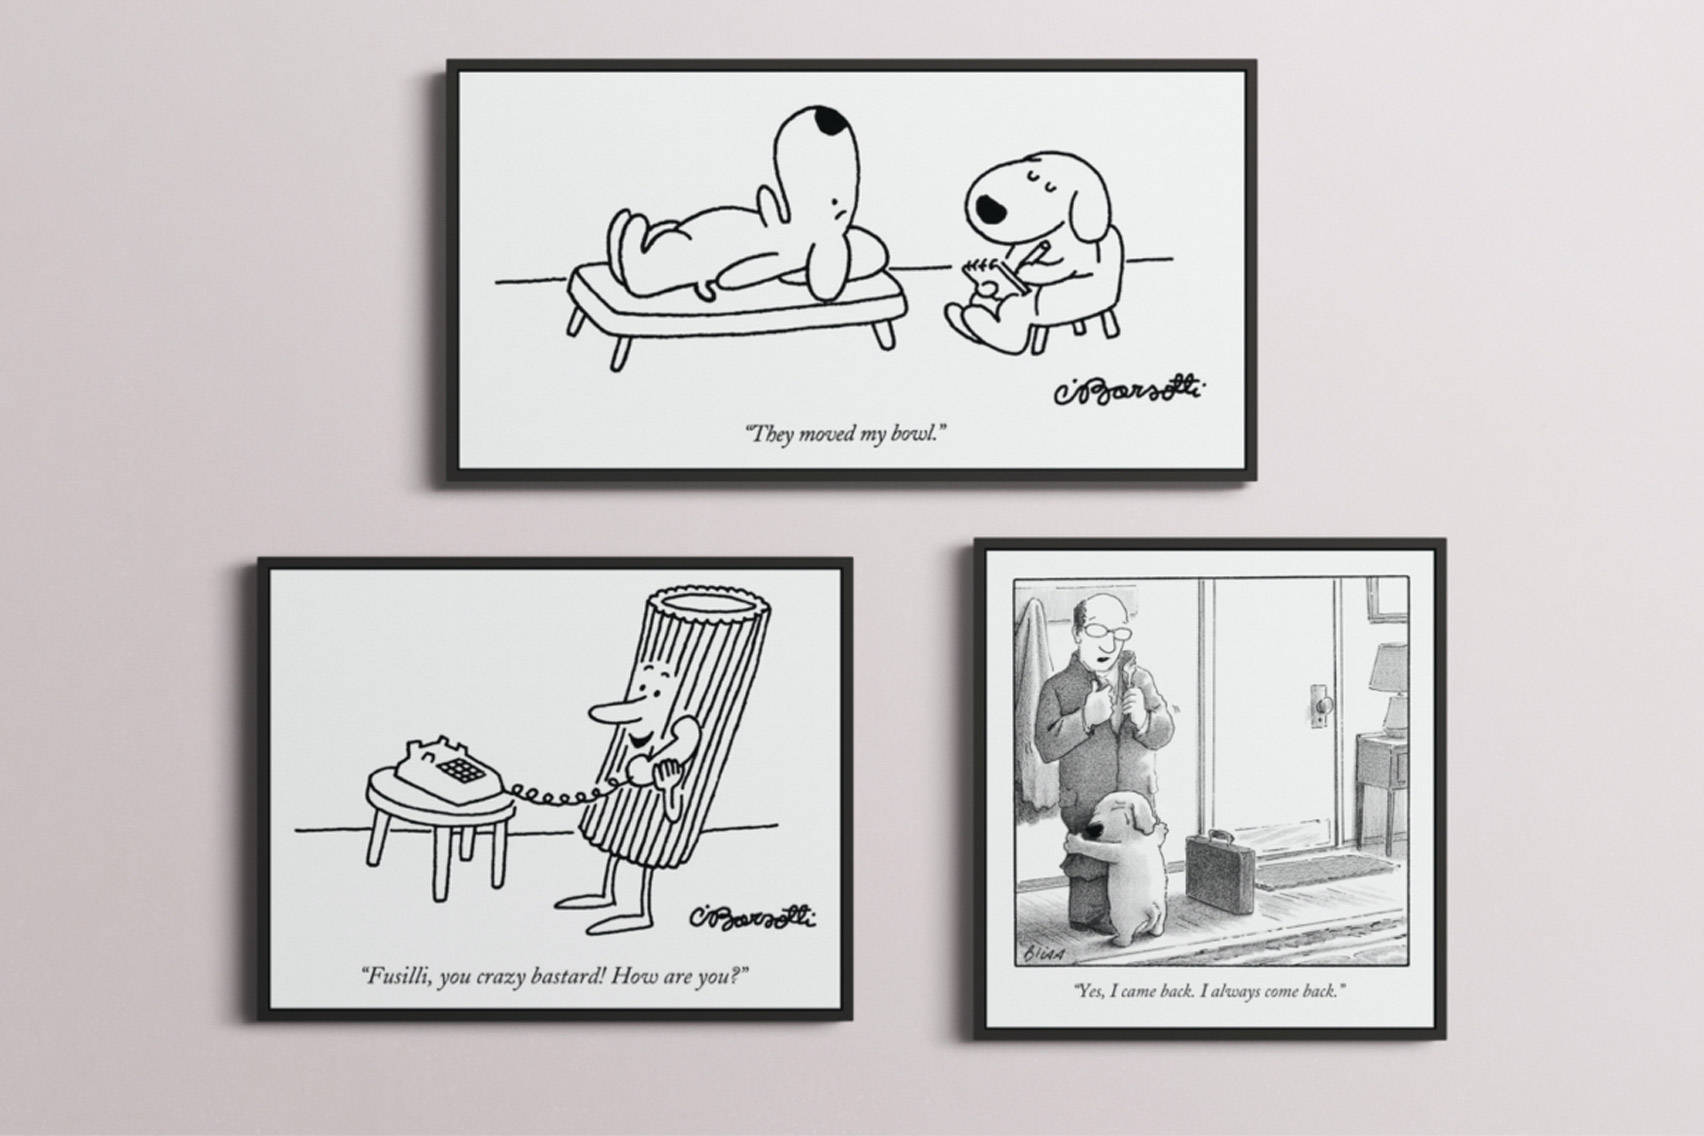 Sketches by American cartoonist Charles Barsotti from Fine Art America's Condé Nast Art Collections